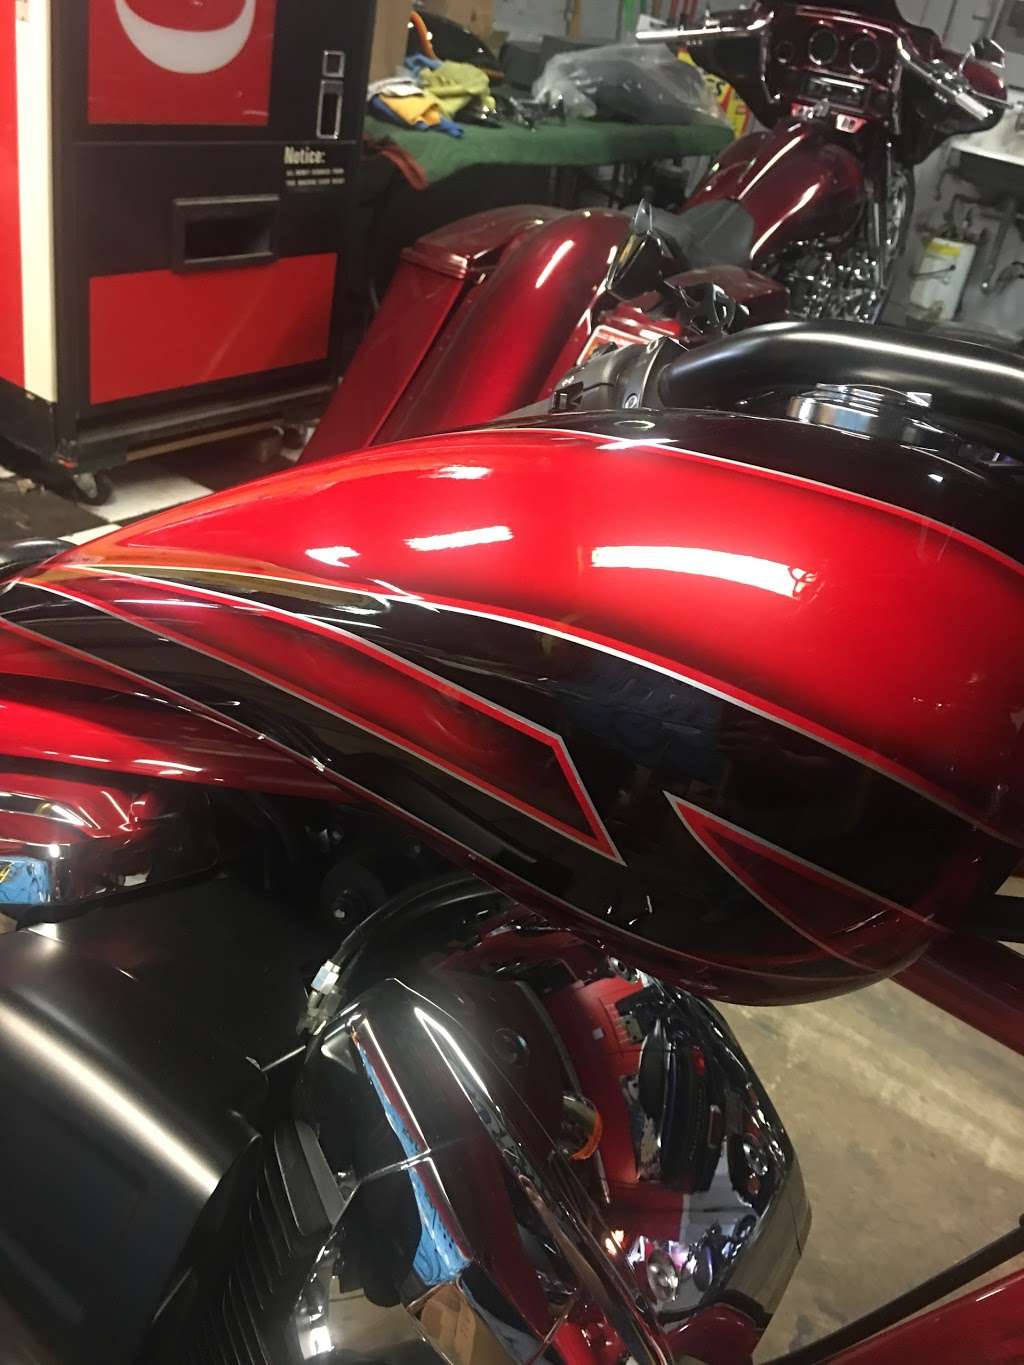 distant brothers motorcycle LLC | 8696 47th St, Lyons, IL 60534, USA | Phone: (708) 990-4724